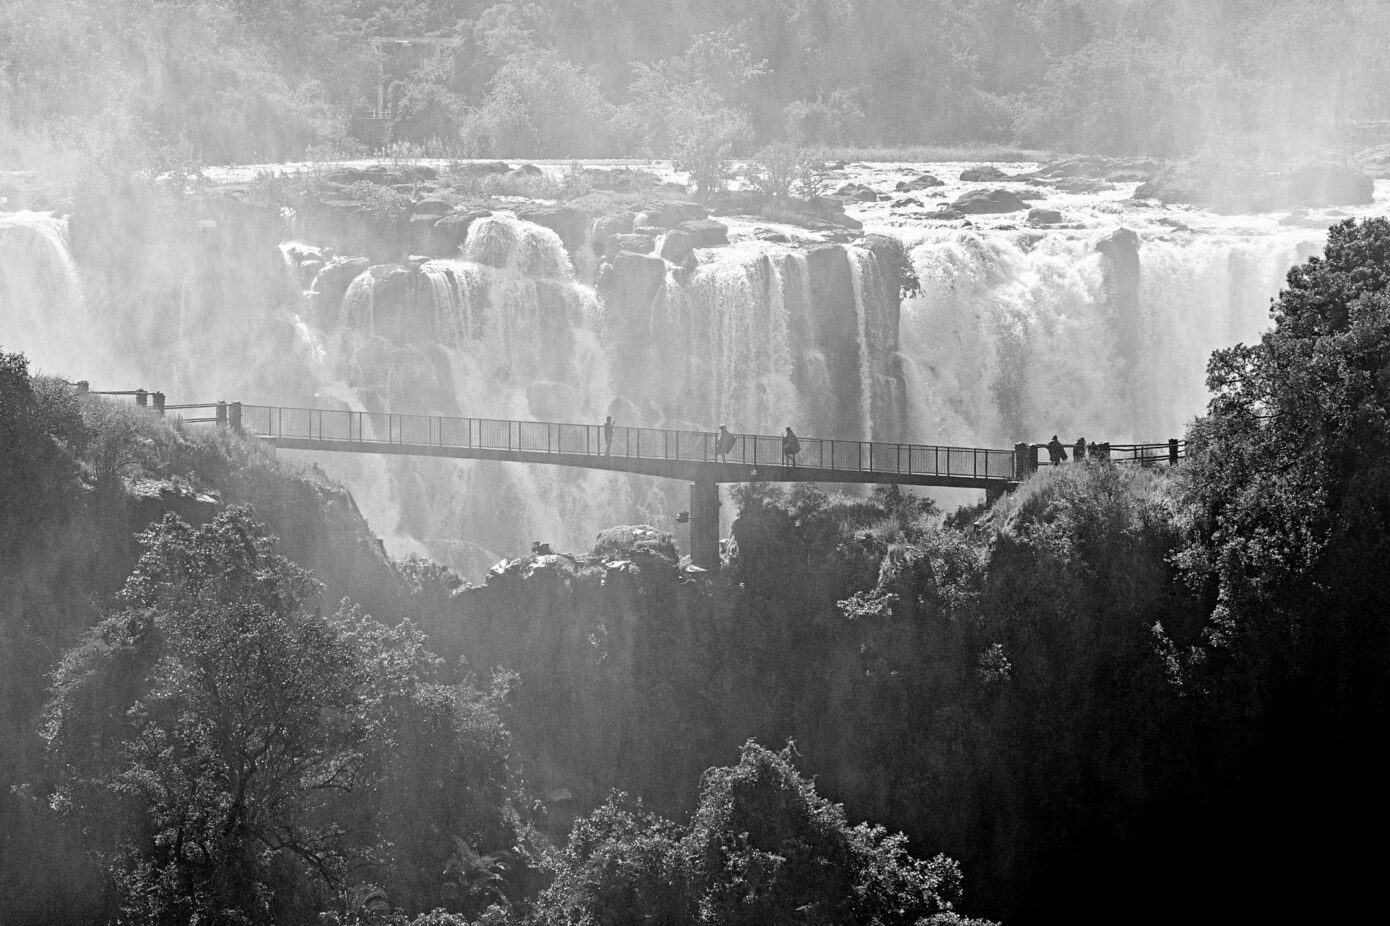 Another_Visit_to_Victoria_Falls.jpg